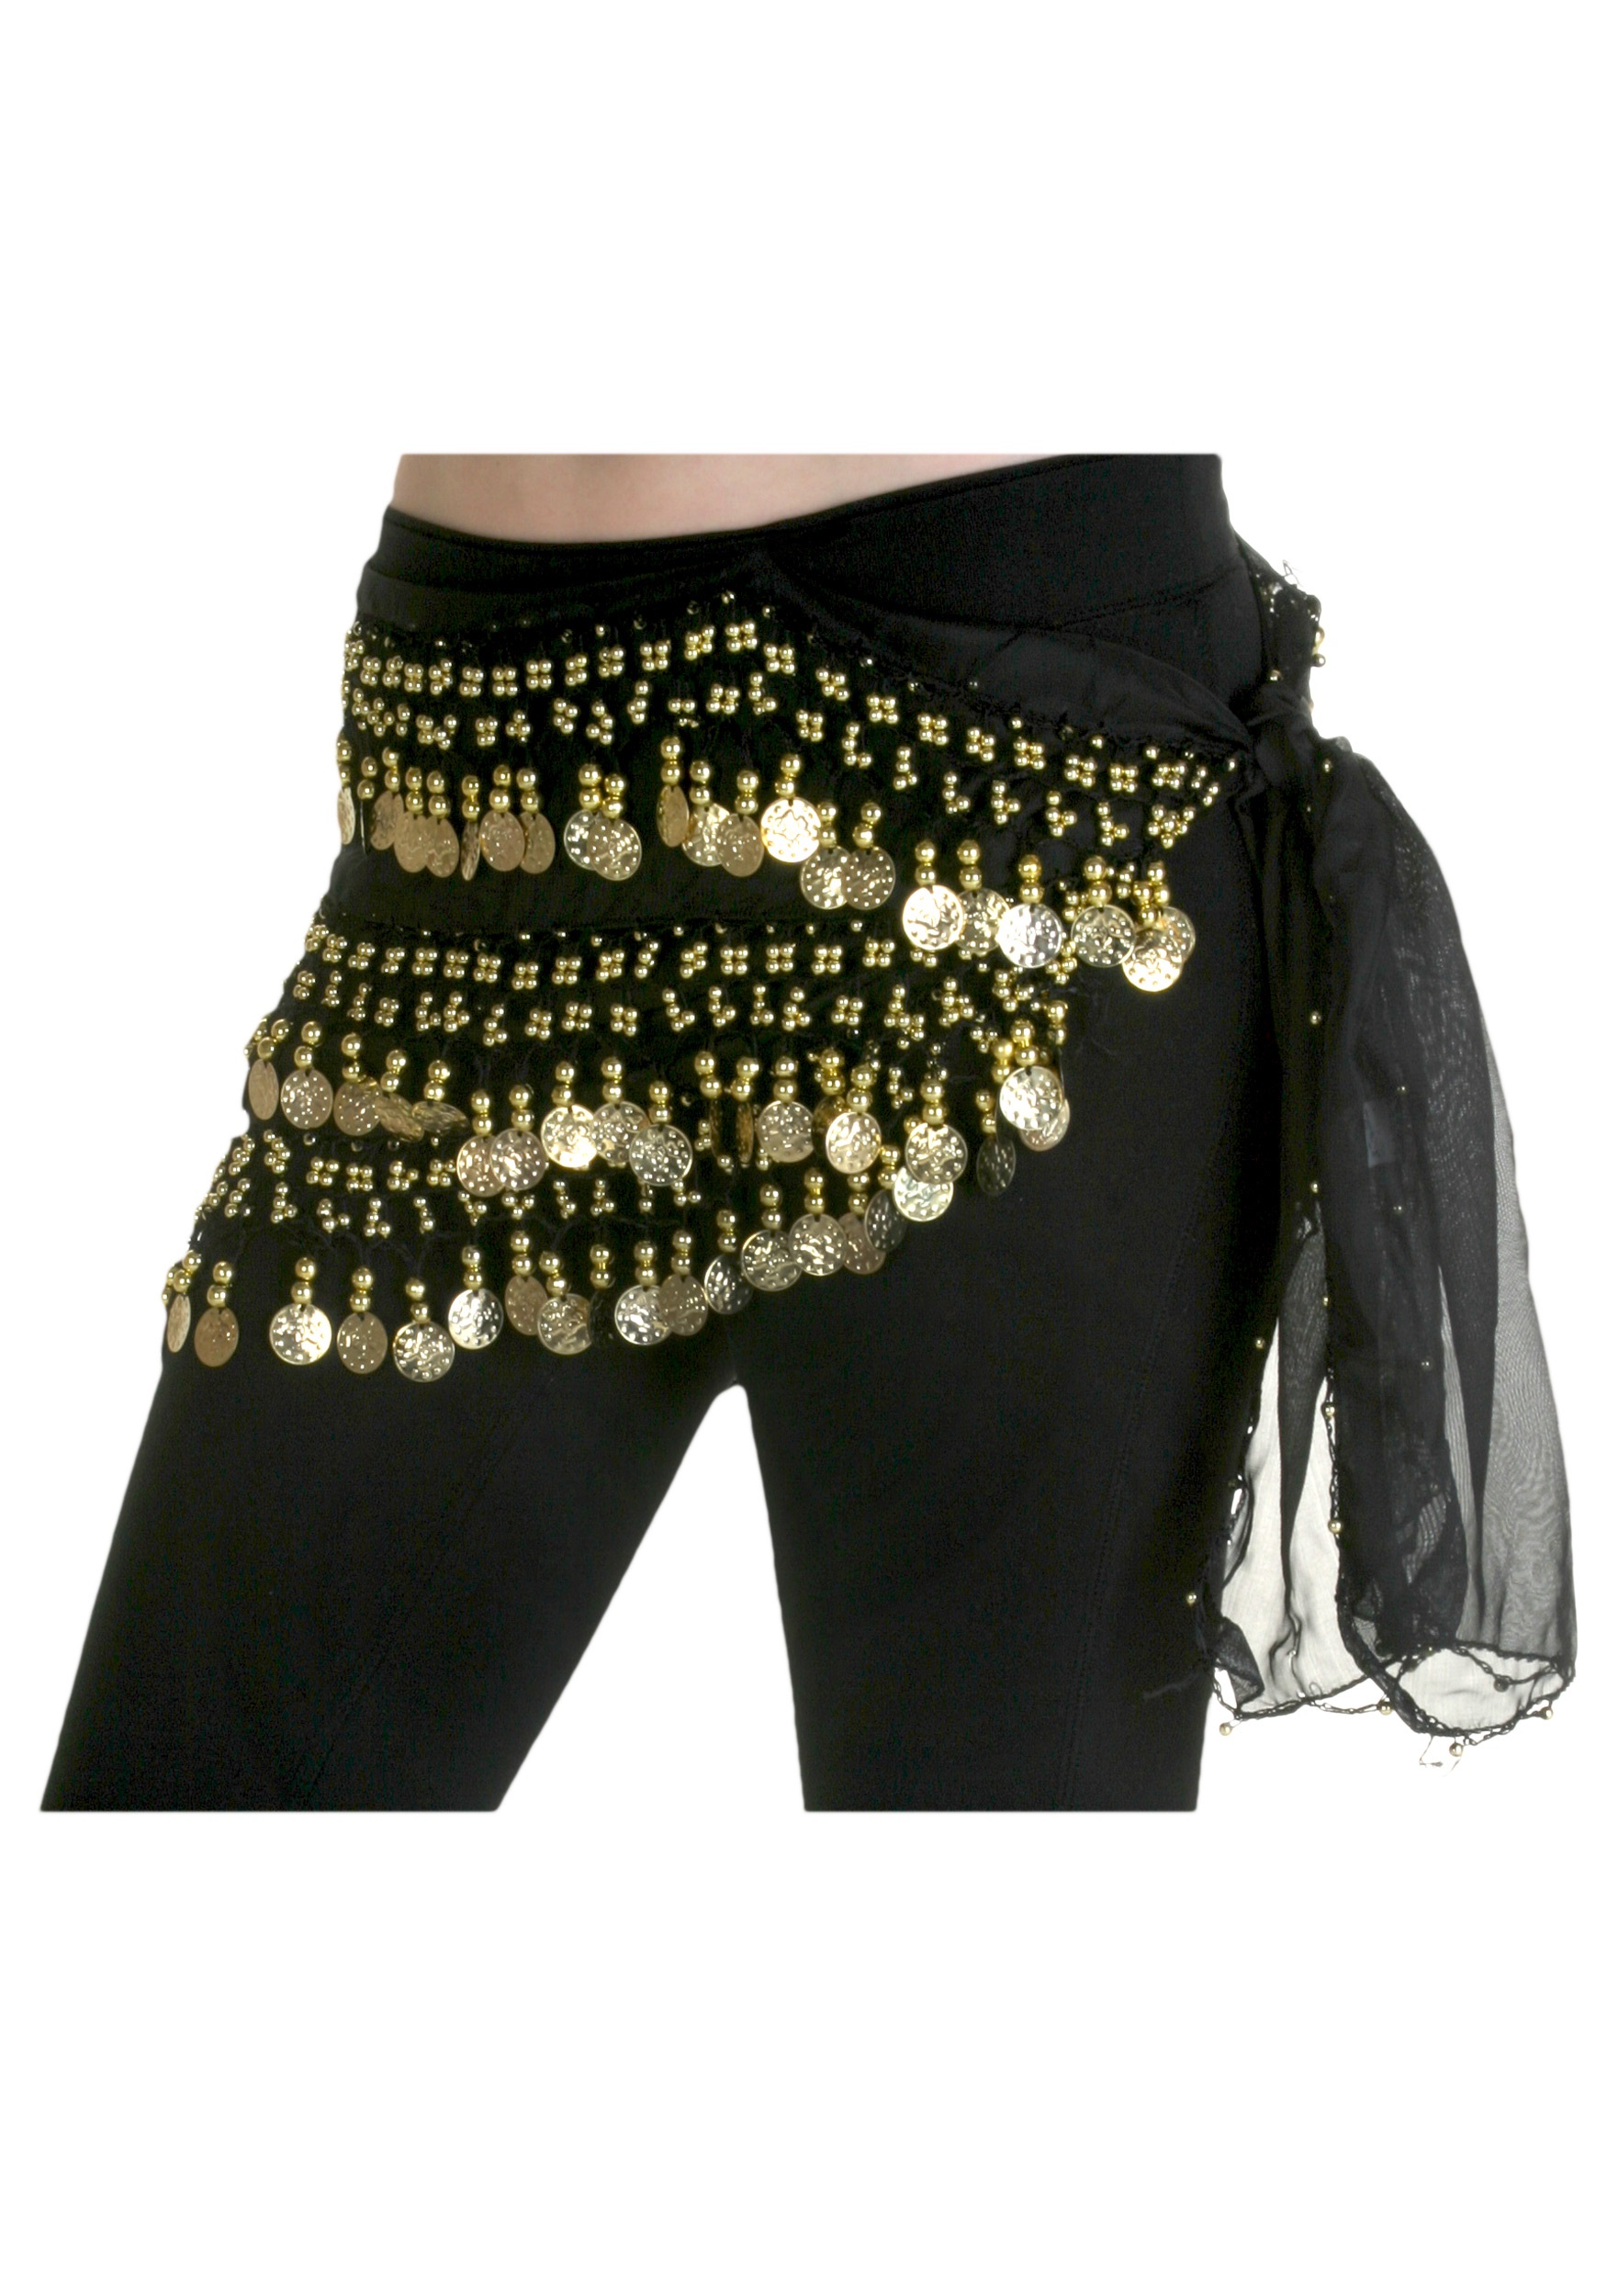 Belly Dancing Black Chiffon Hip Scarf , Costume Accessories